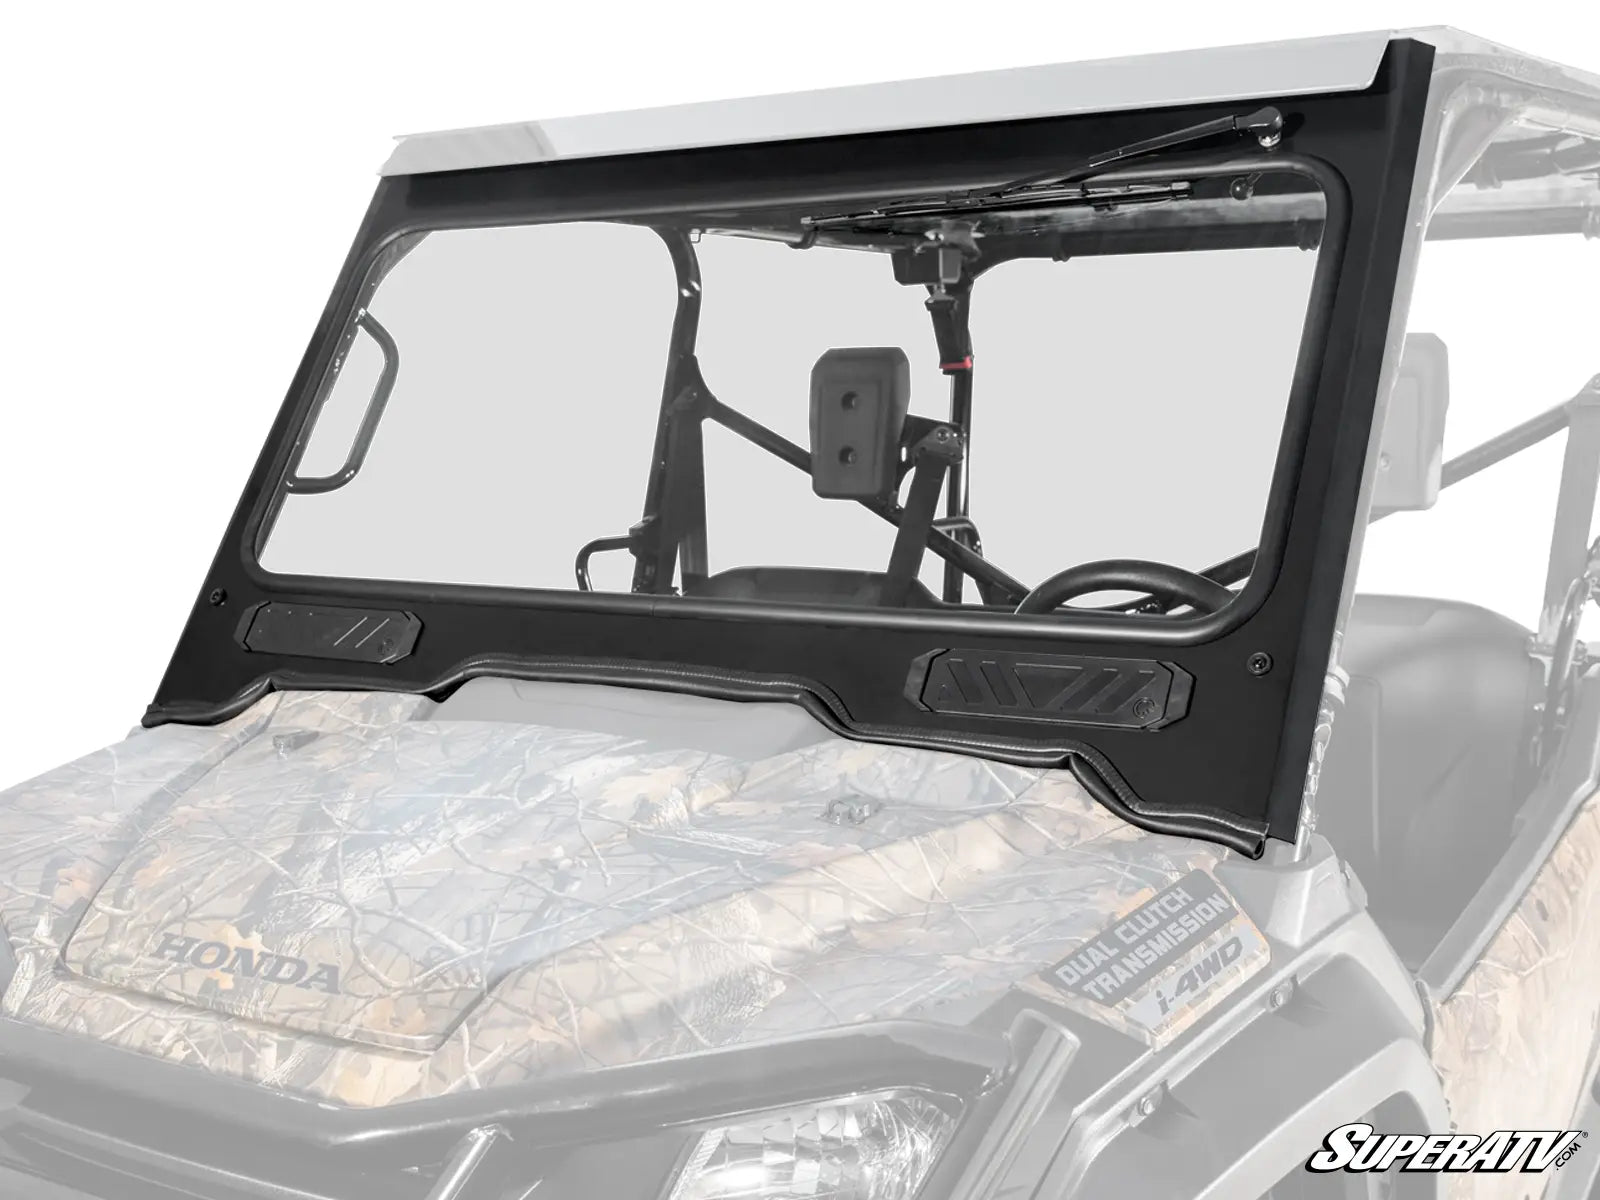 Manual Wiper Kit For Hard Coated Or Glass Windshields - Spike Powersports